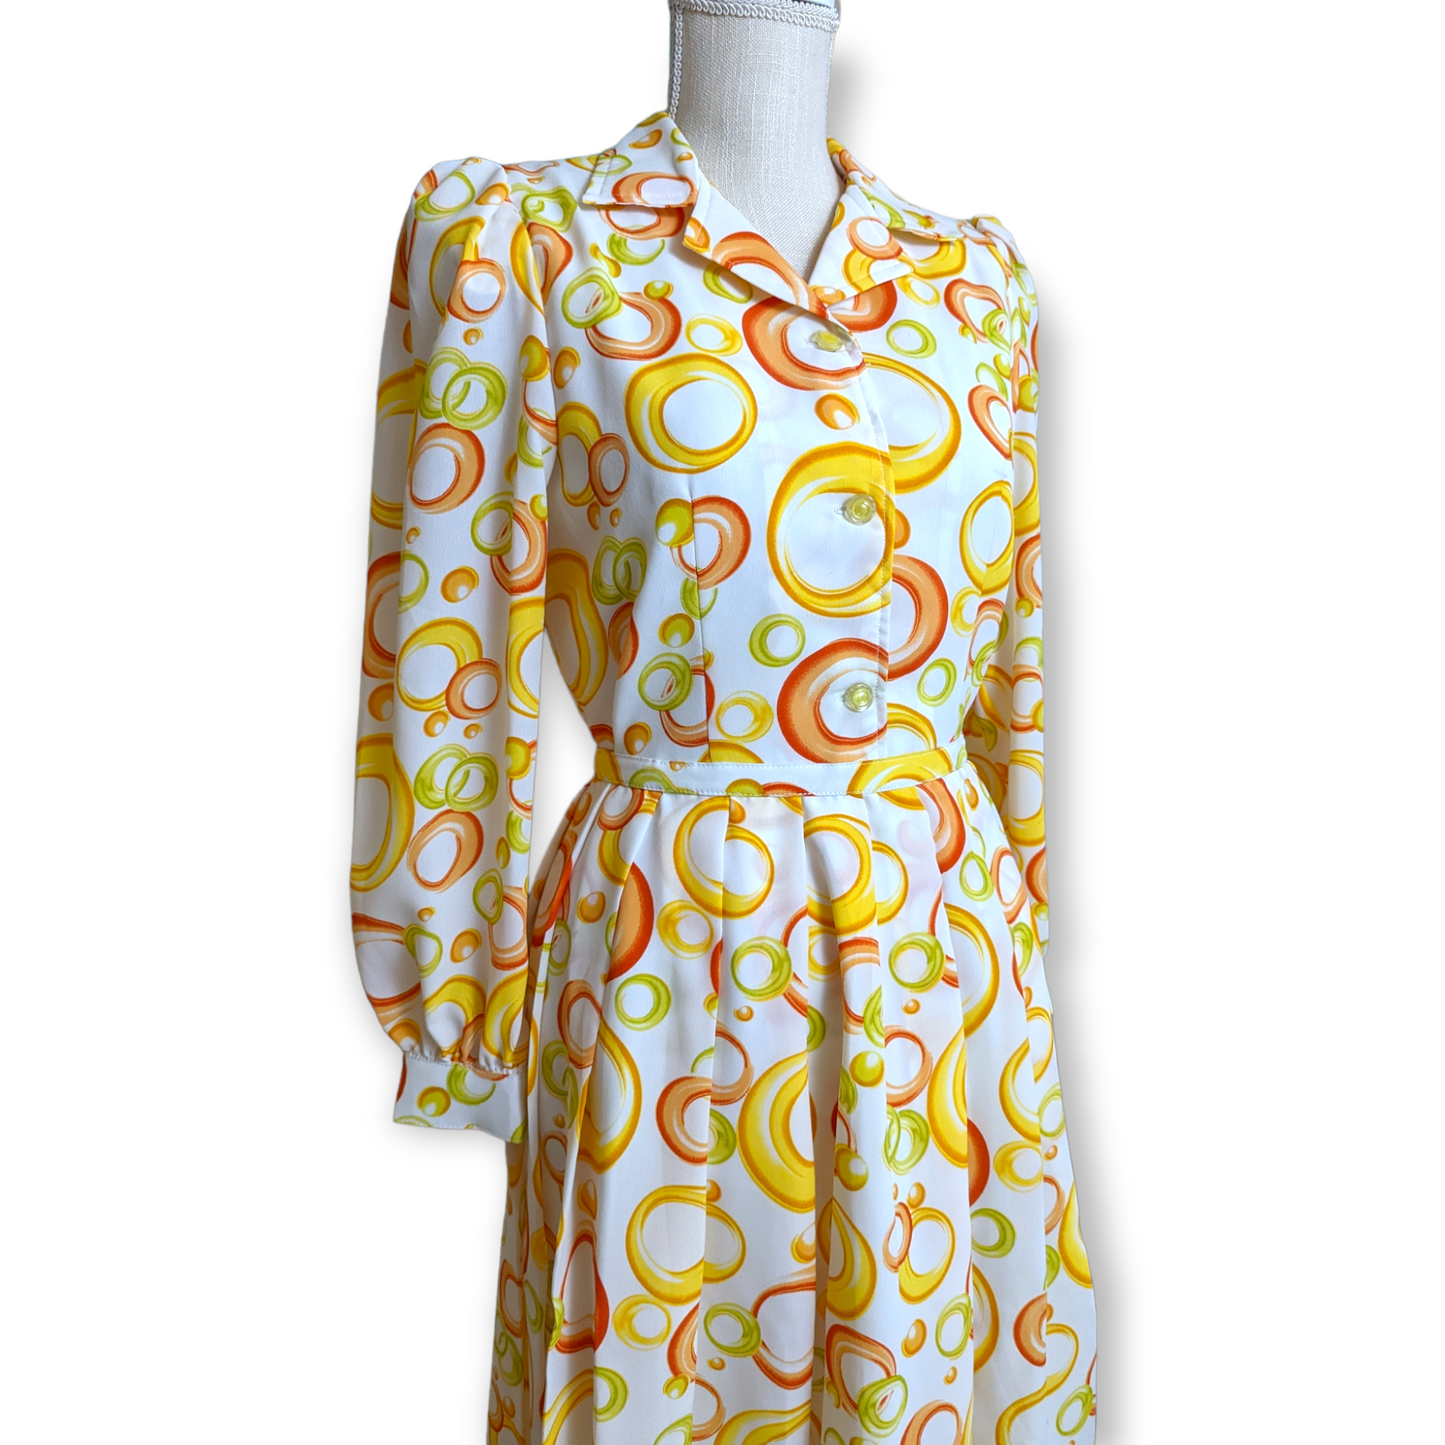 1970s Two Piece Blouse and Pleated Skirt Set With Yellow and Orange Mod Circle Pattern, Butterfly Collar, Long Sleeves and Groovy Buttons